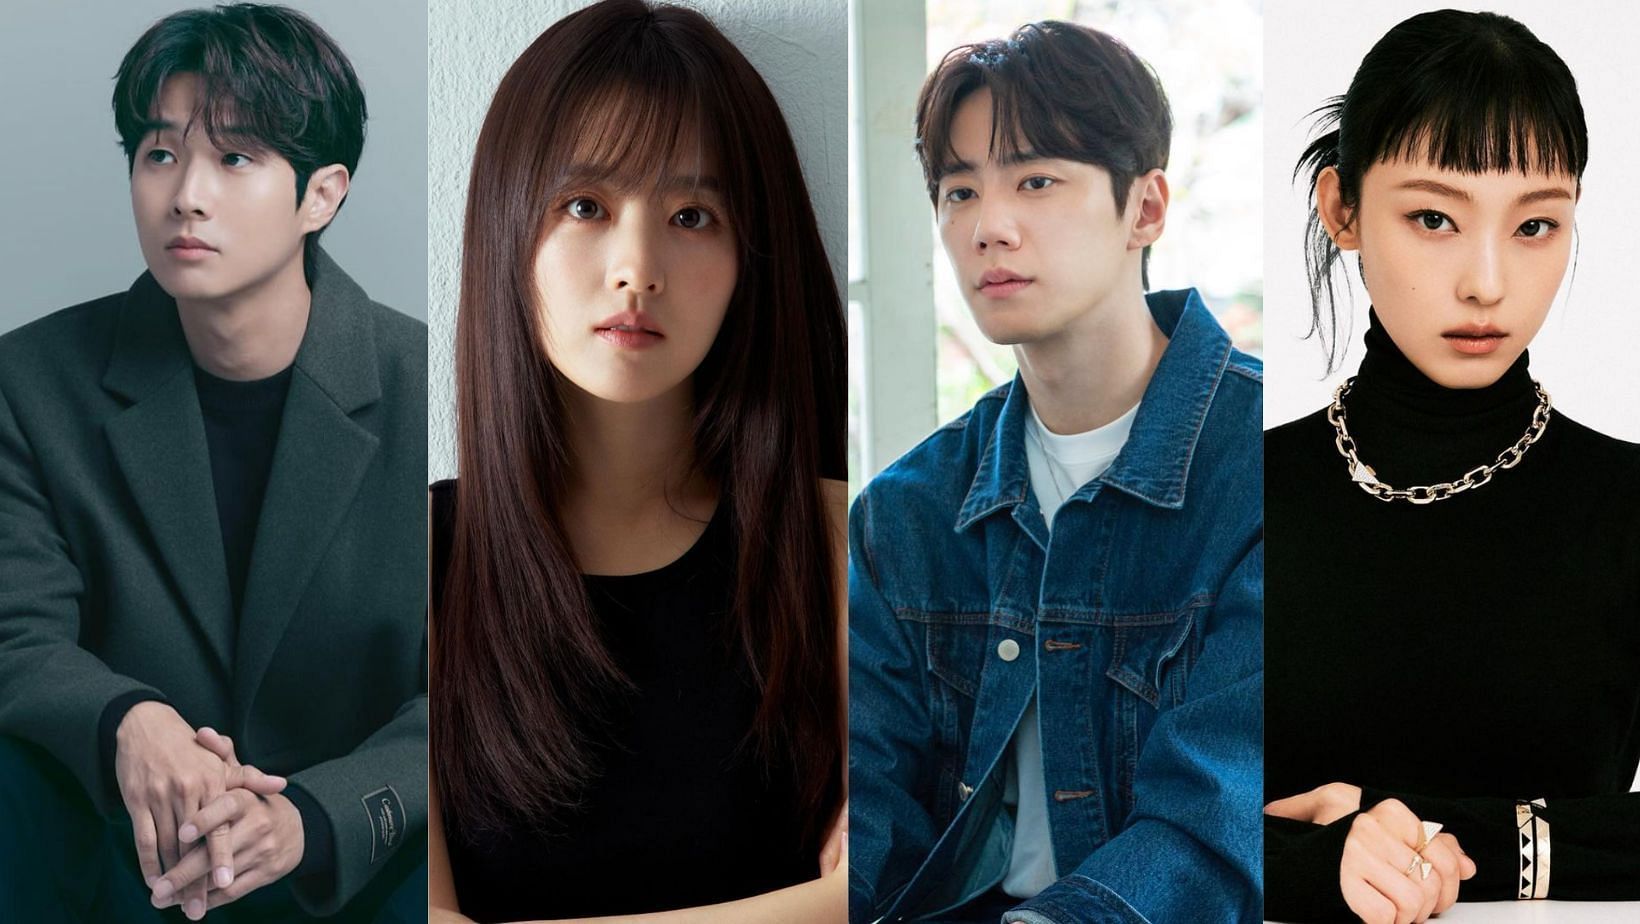 Choi Woo-shik, Park Bo-young, Lee Jun-young, and Jeon So-nee all set to star in the upcoming drama 